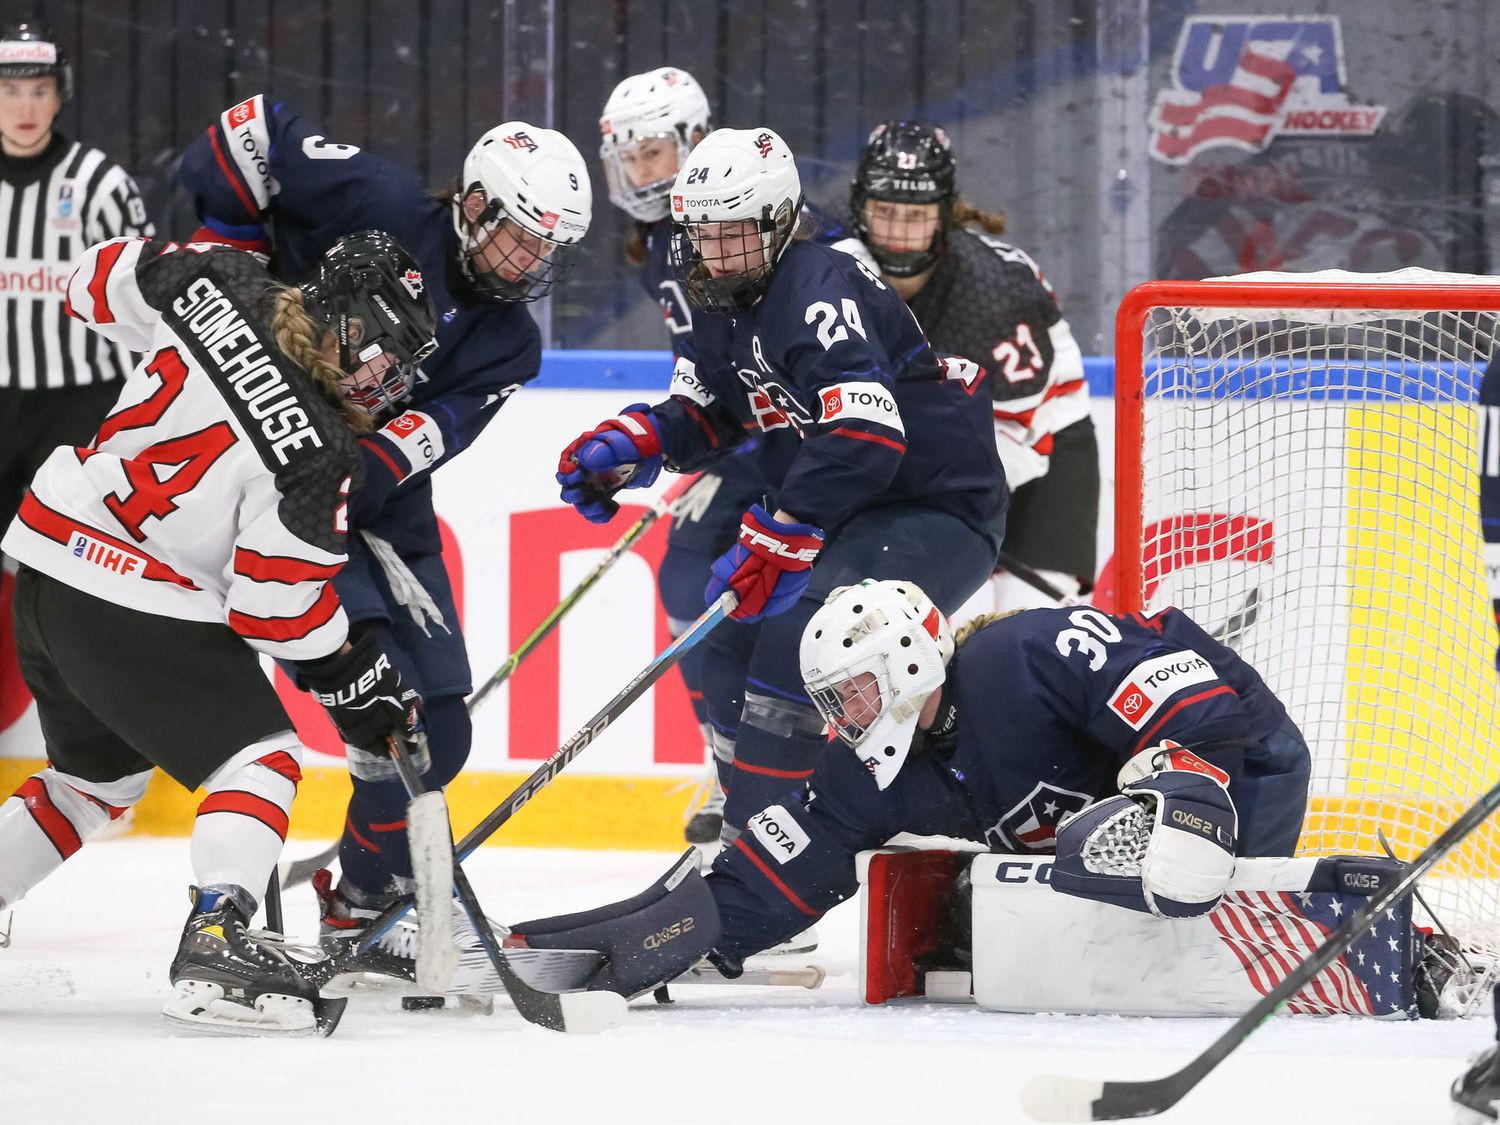 United States and Canada seal direct routes through to last four of Under-18 Women’s World Ice Hockey Championship